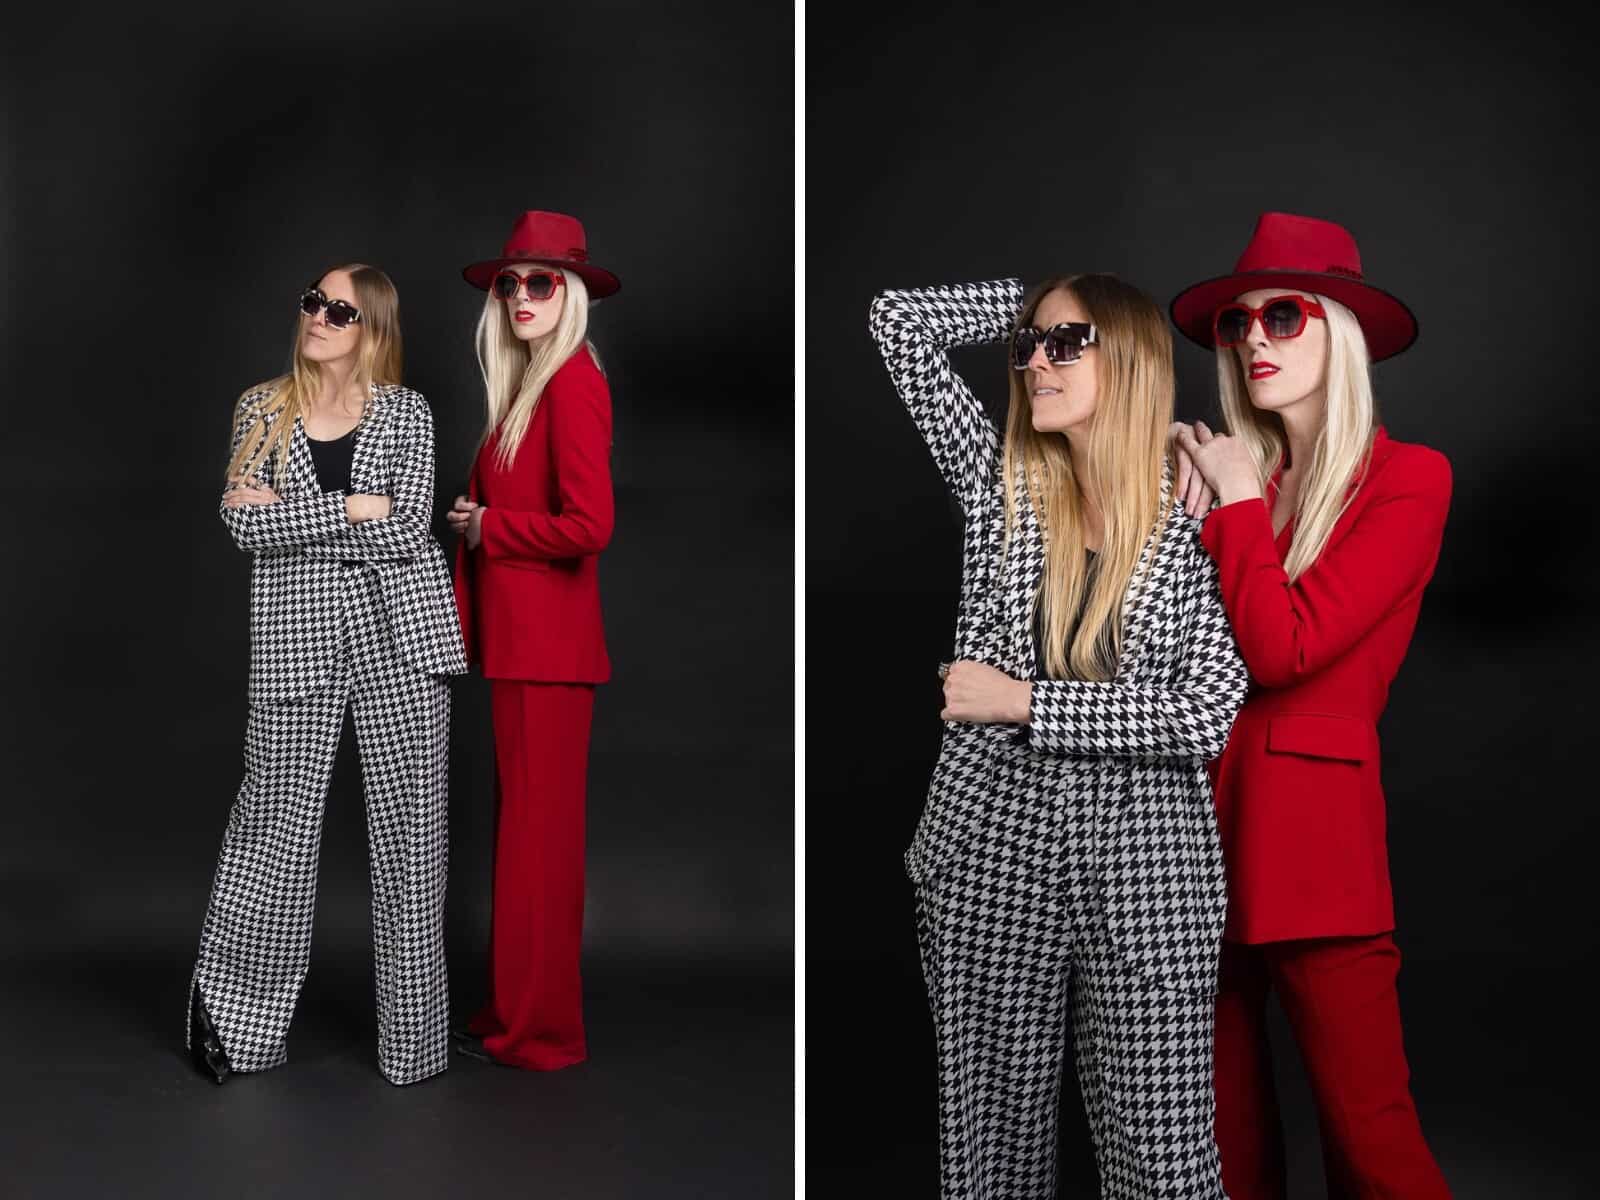 two models in pantsuits with hats and sunglasses against black background